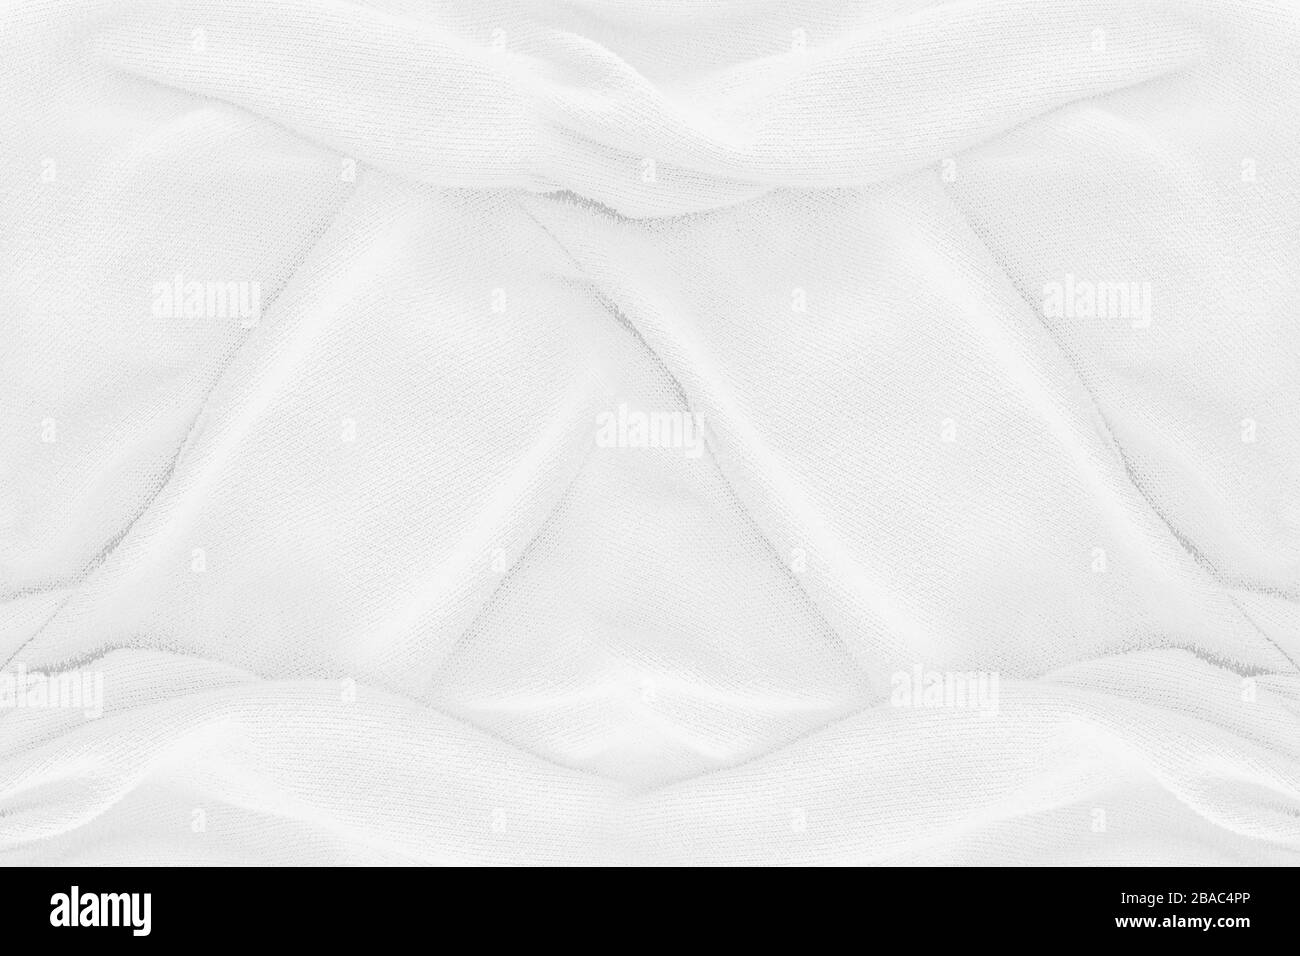 White cloth Free Stock Photos, Images, and Pictures of White cloth